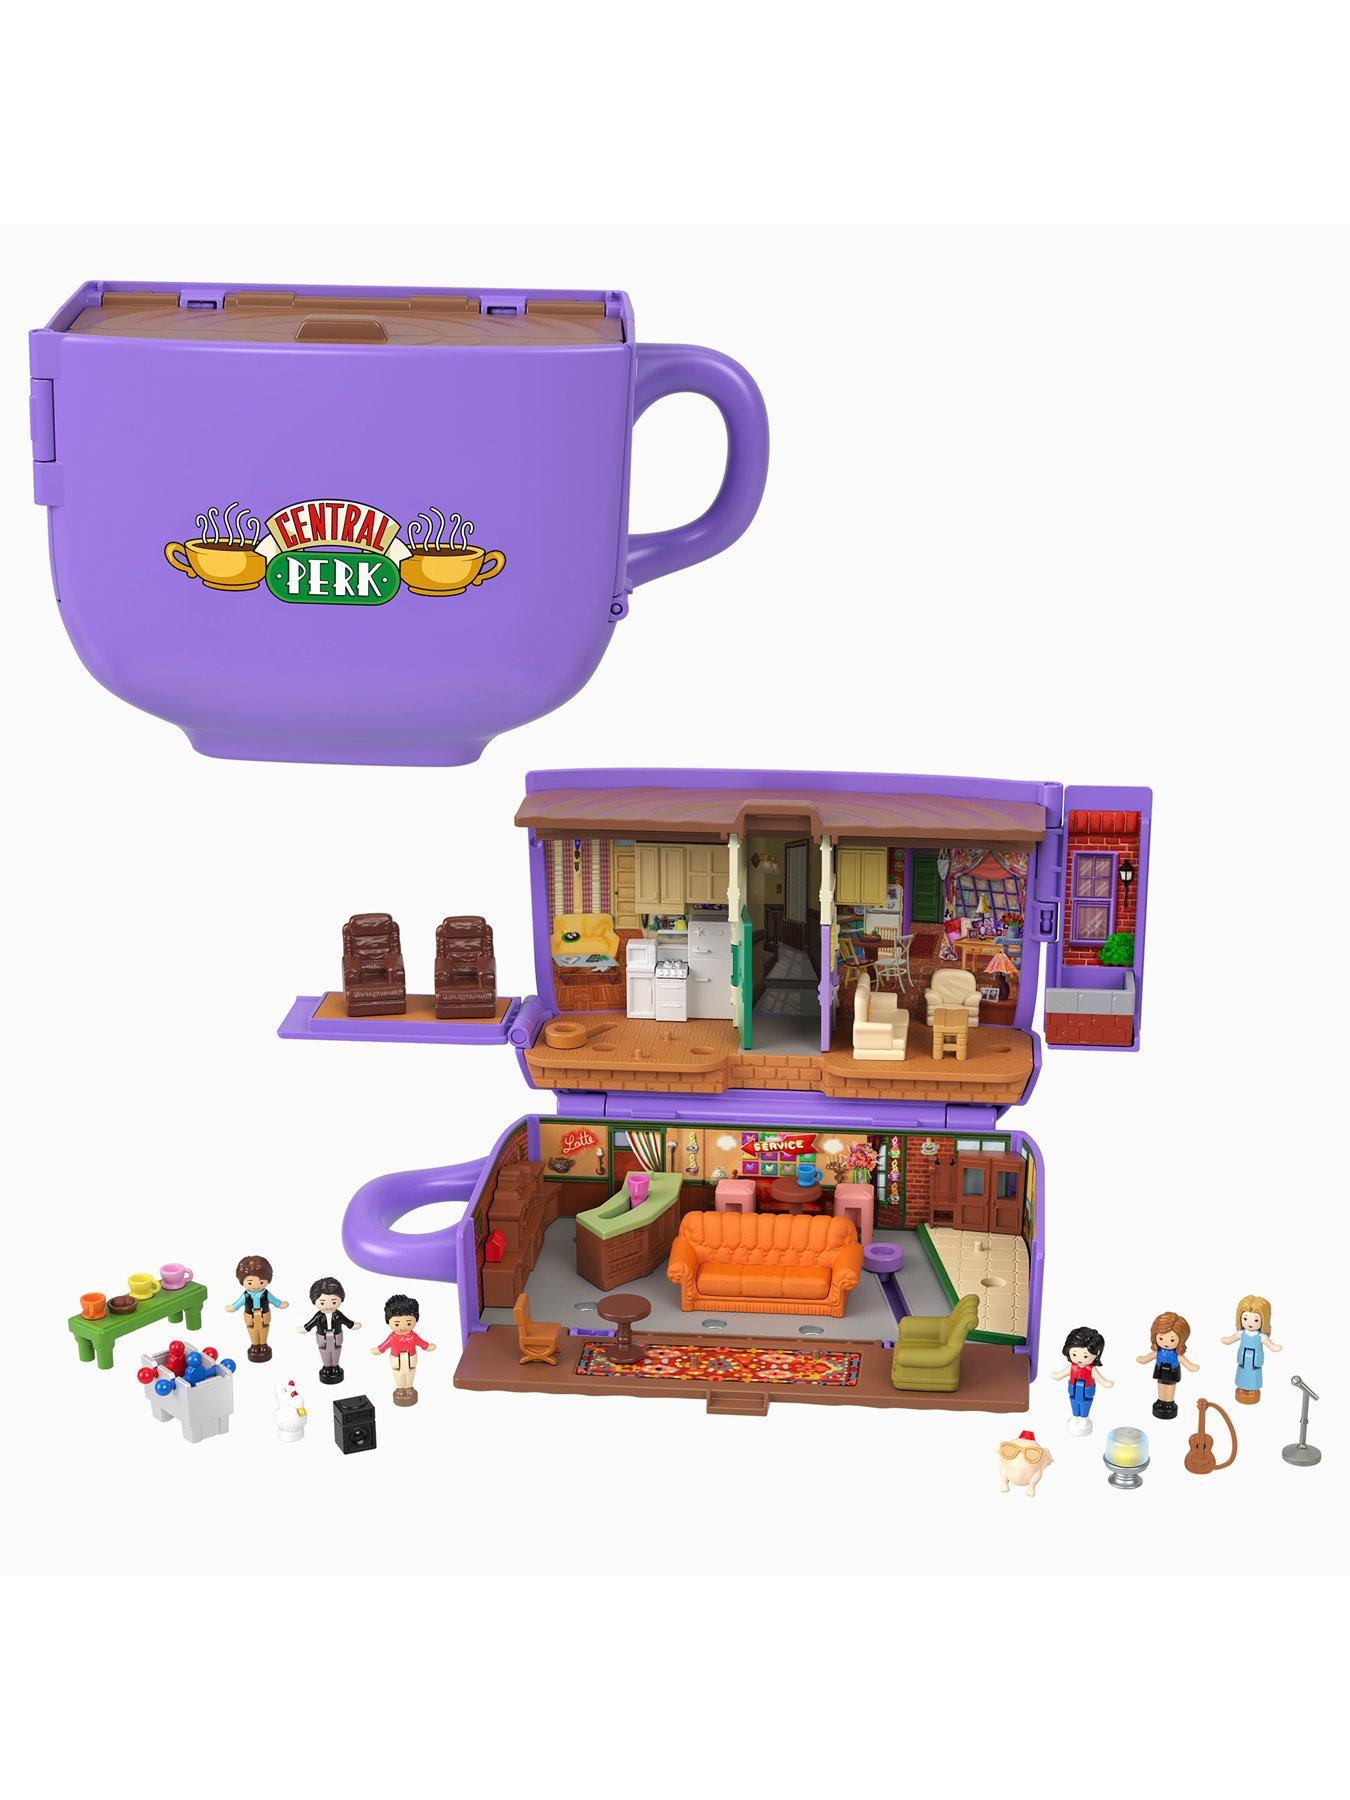 MattelCreations and @Friends announced this Polly Pocket set and I